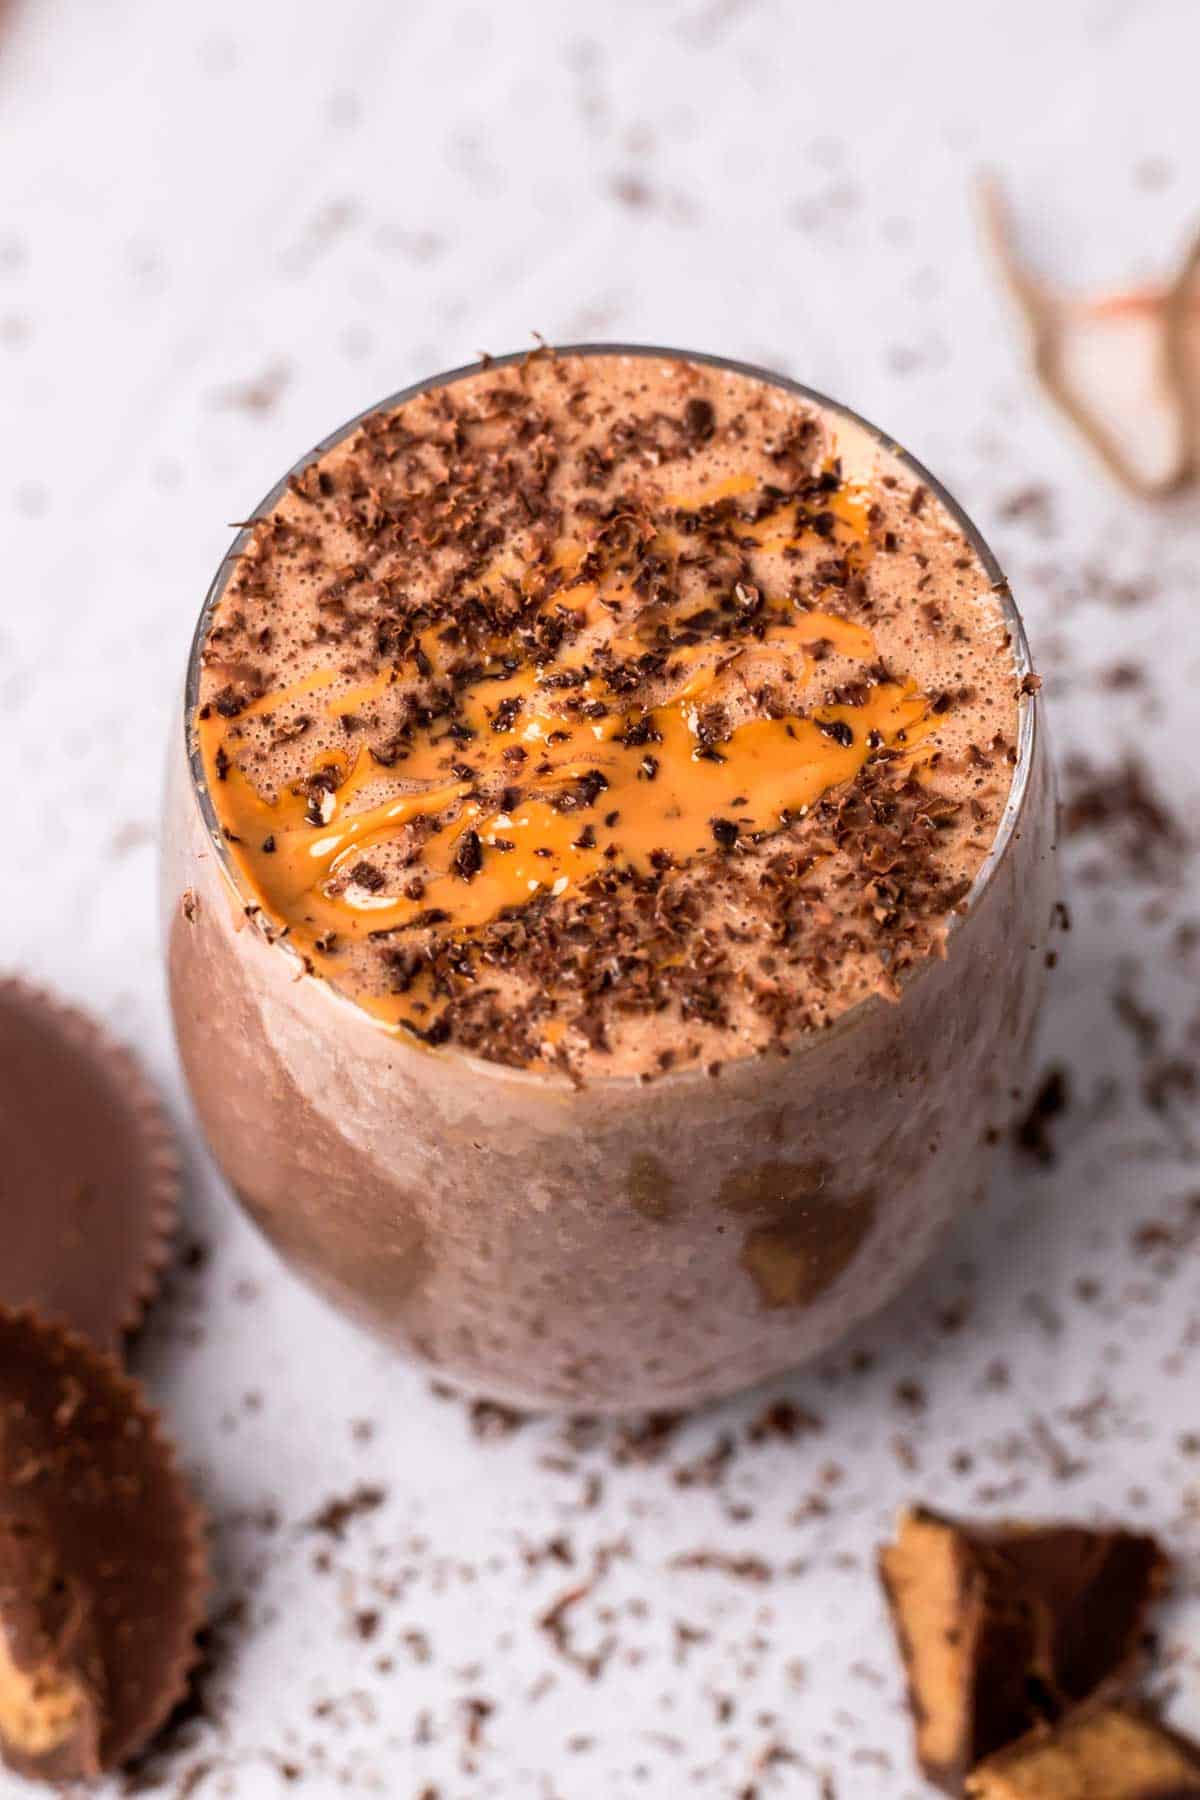 Peanut butter cup tropical smoothie in a glass decorated with peanut butter and shredded chocolate